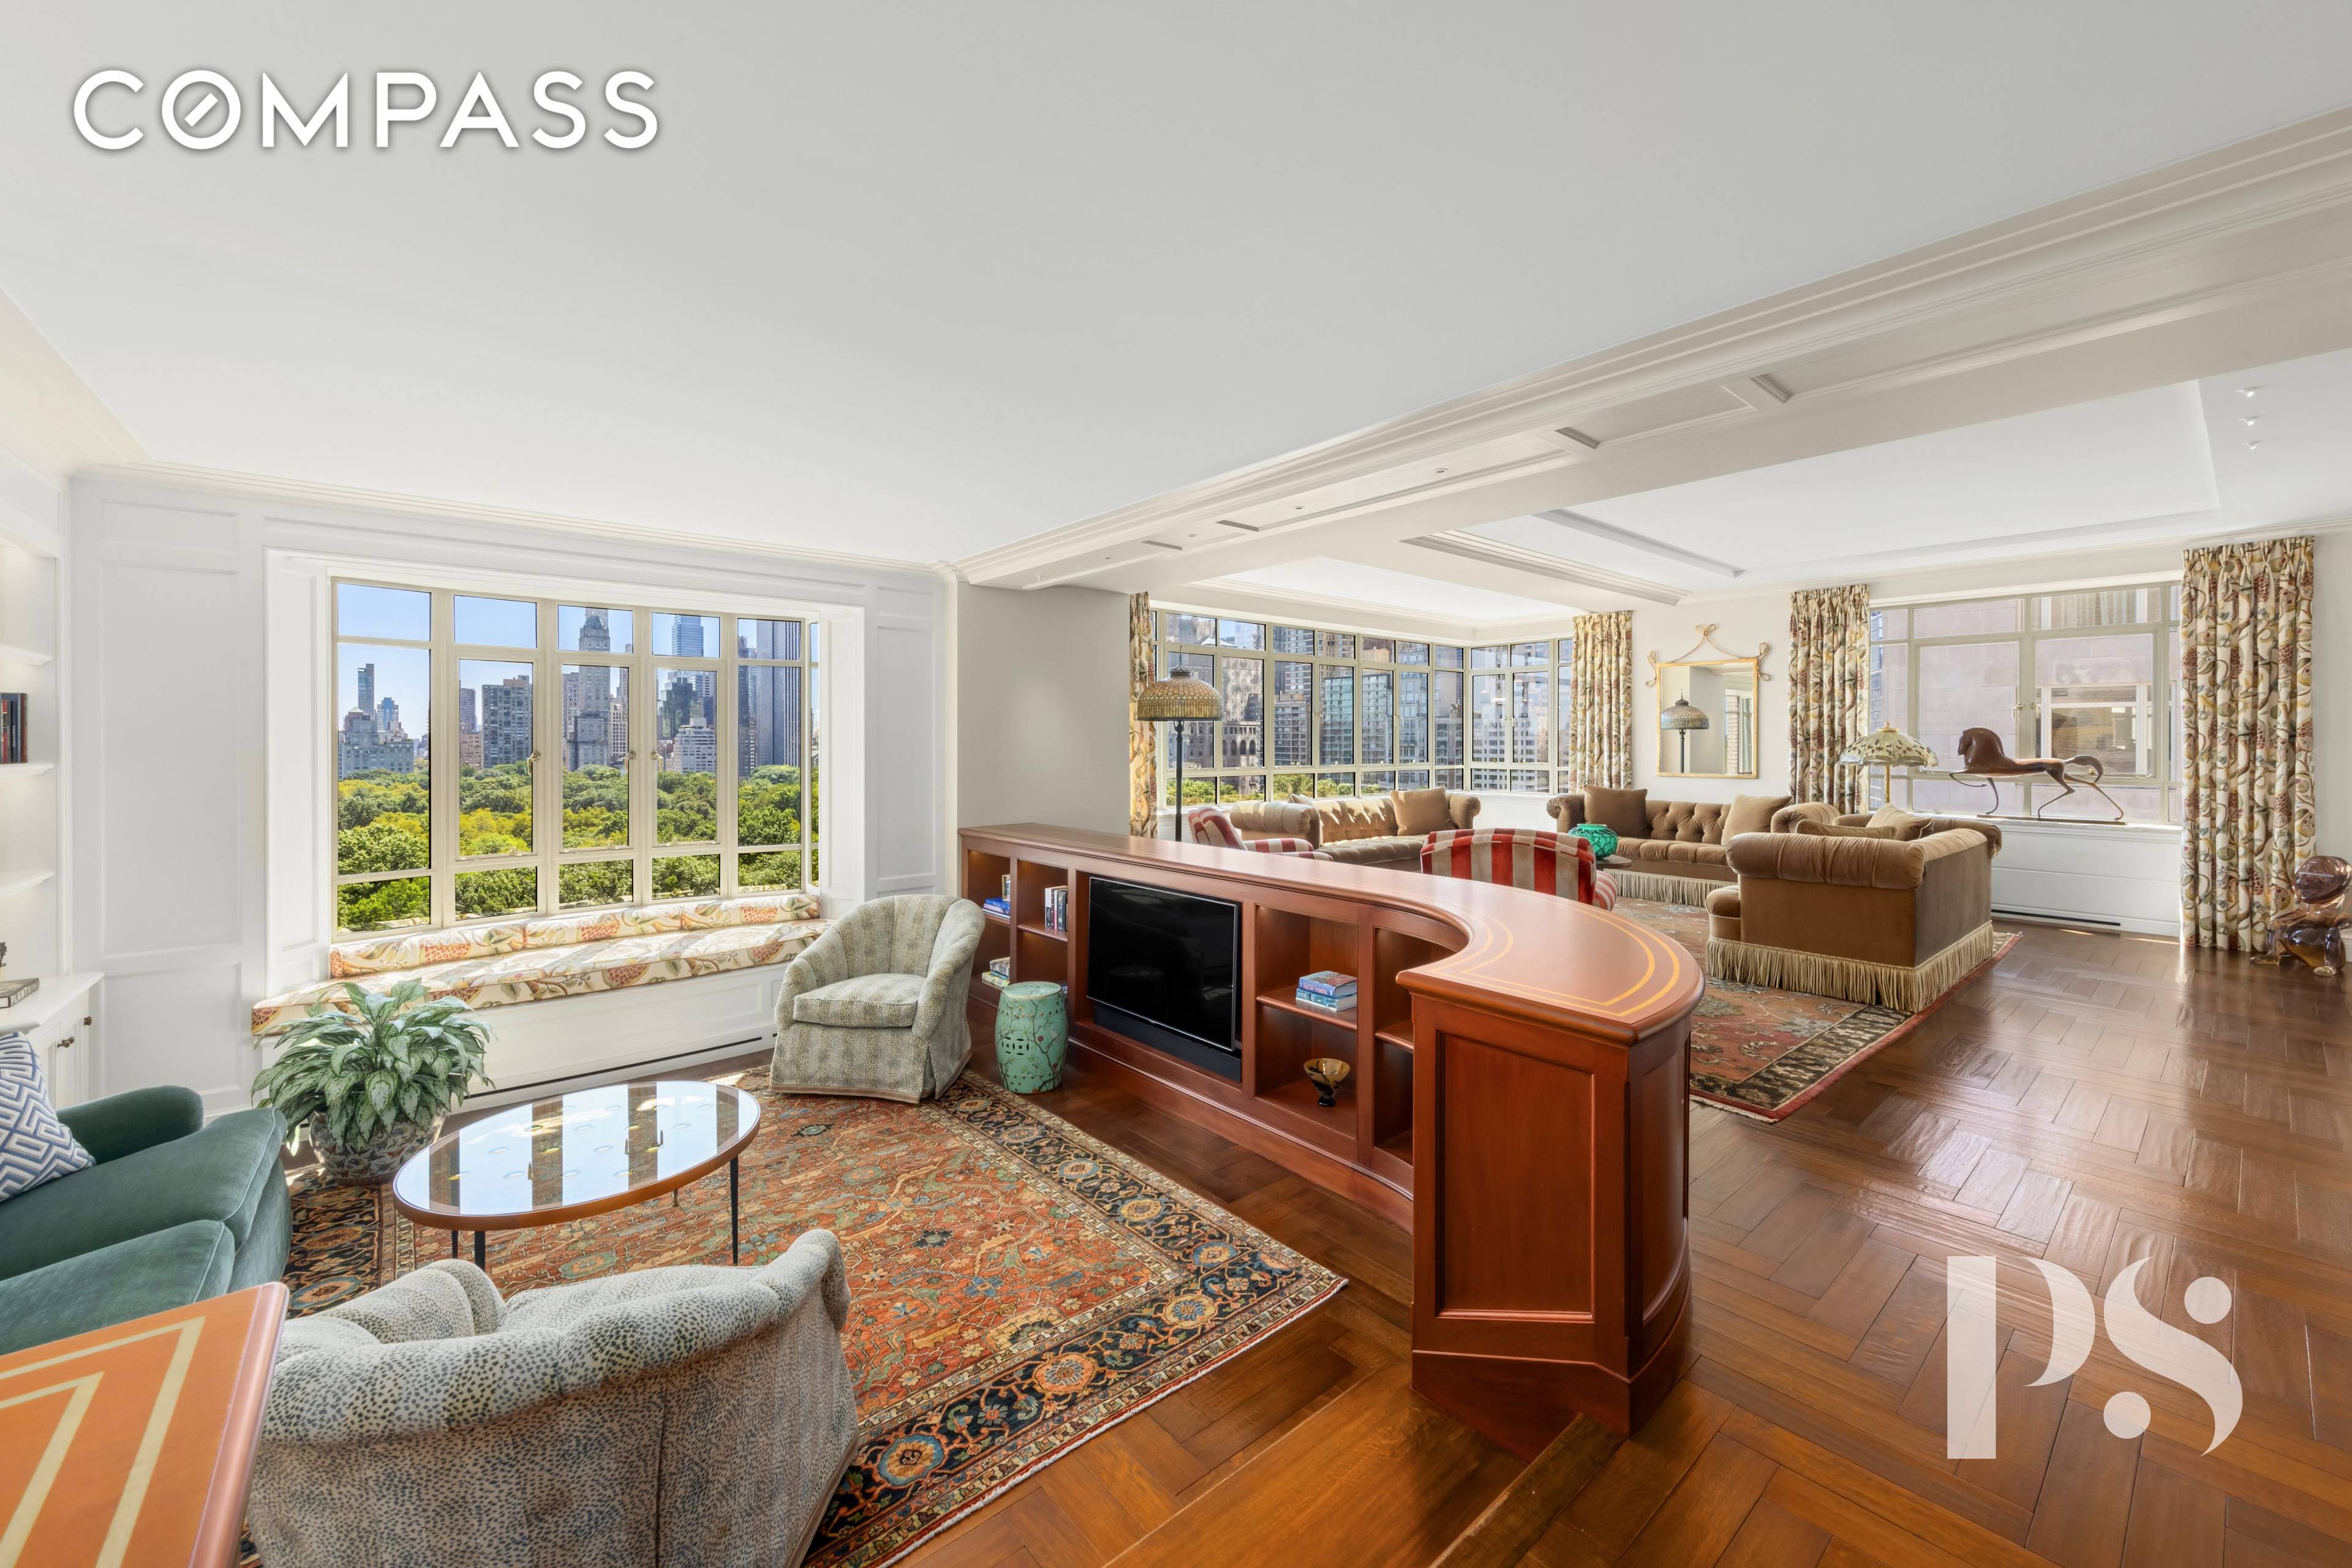 Discover a truly exceptional living experience in this one of a kind apartment with breathtaking views overlooking Central Park.